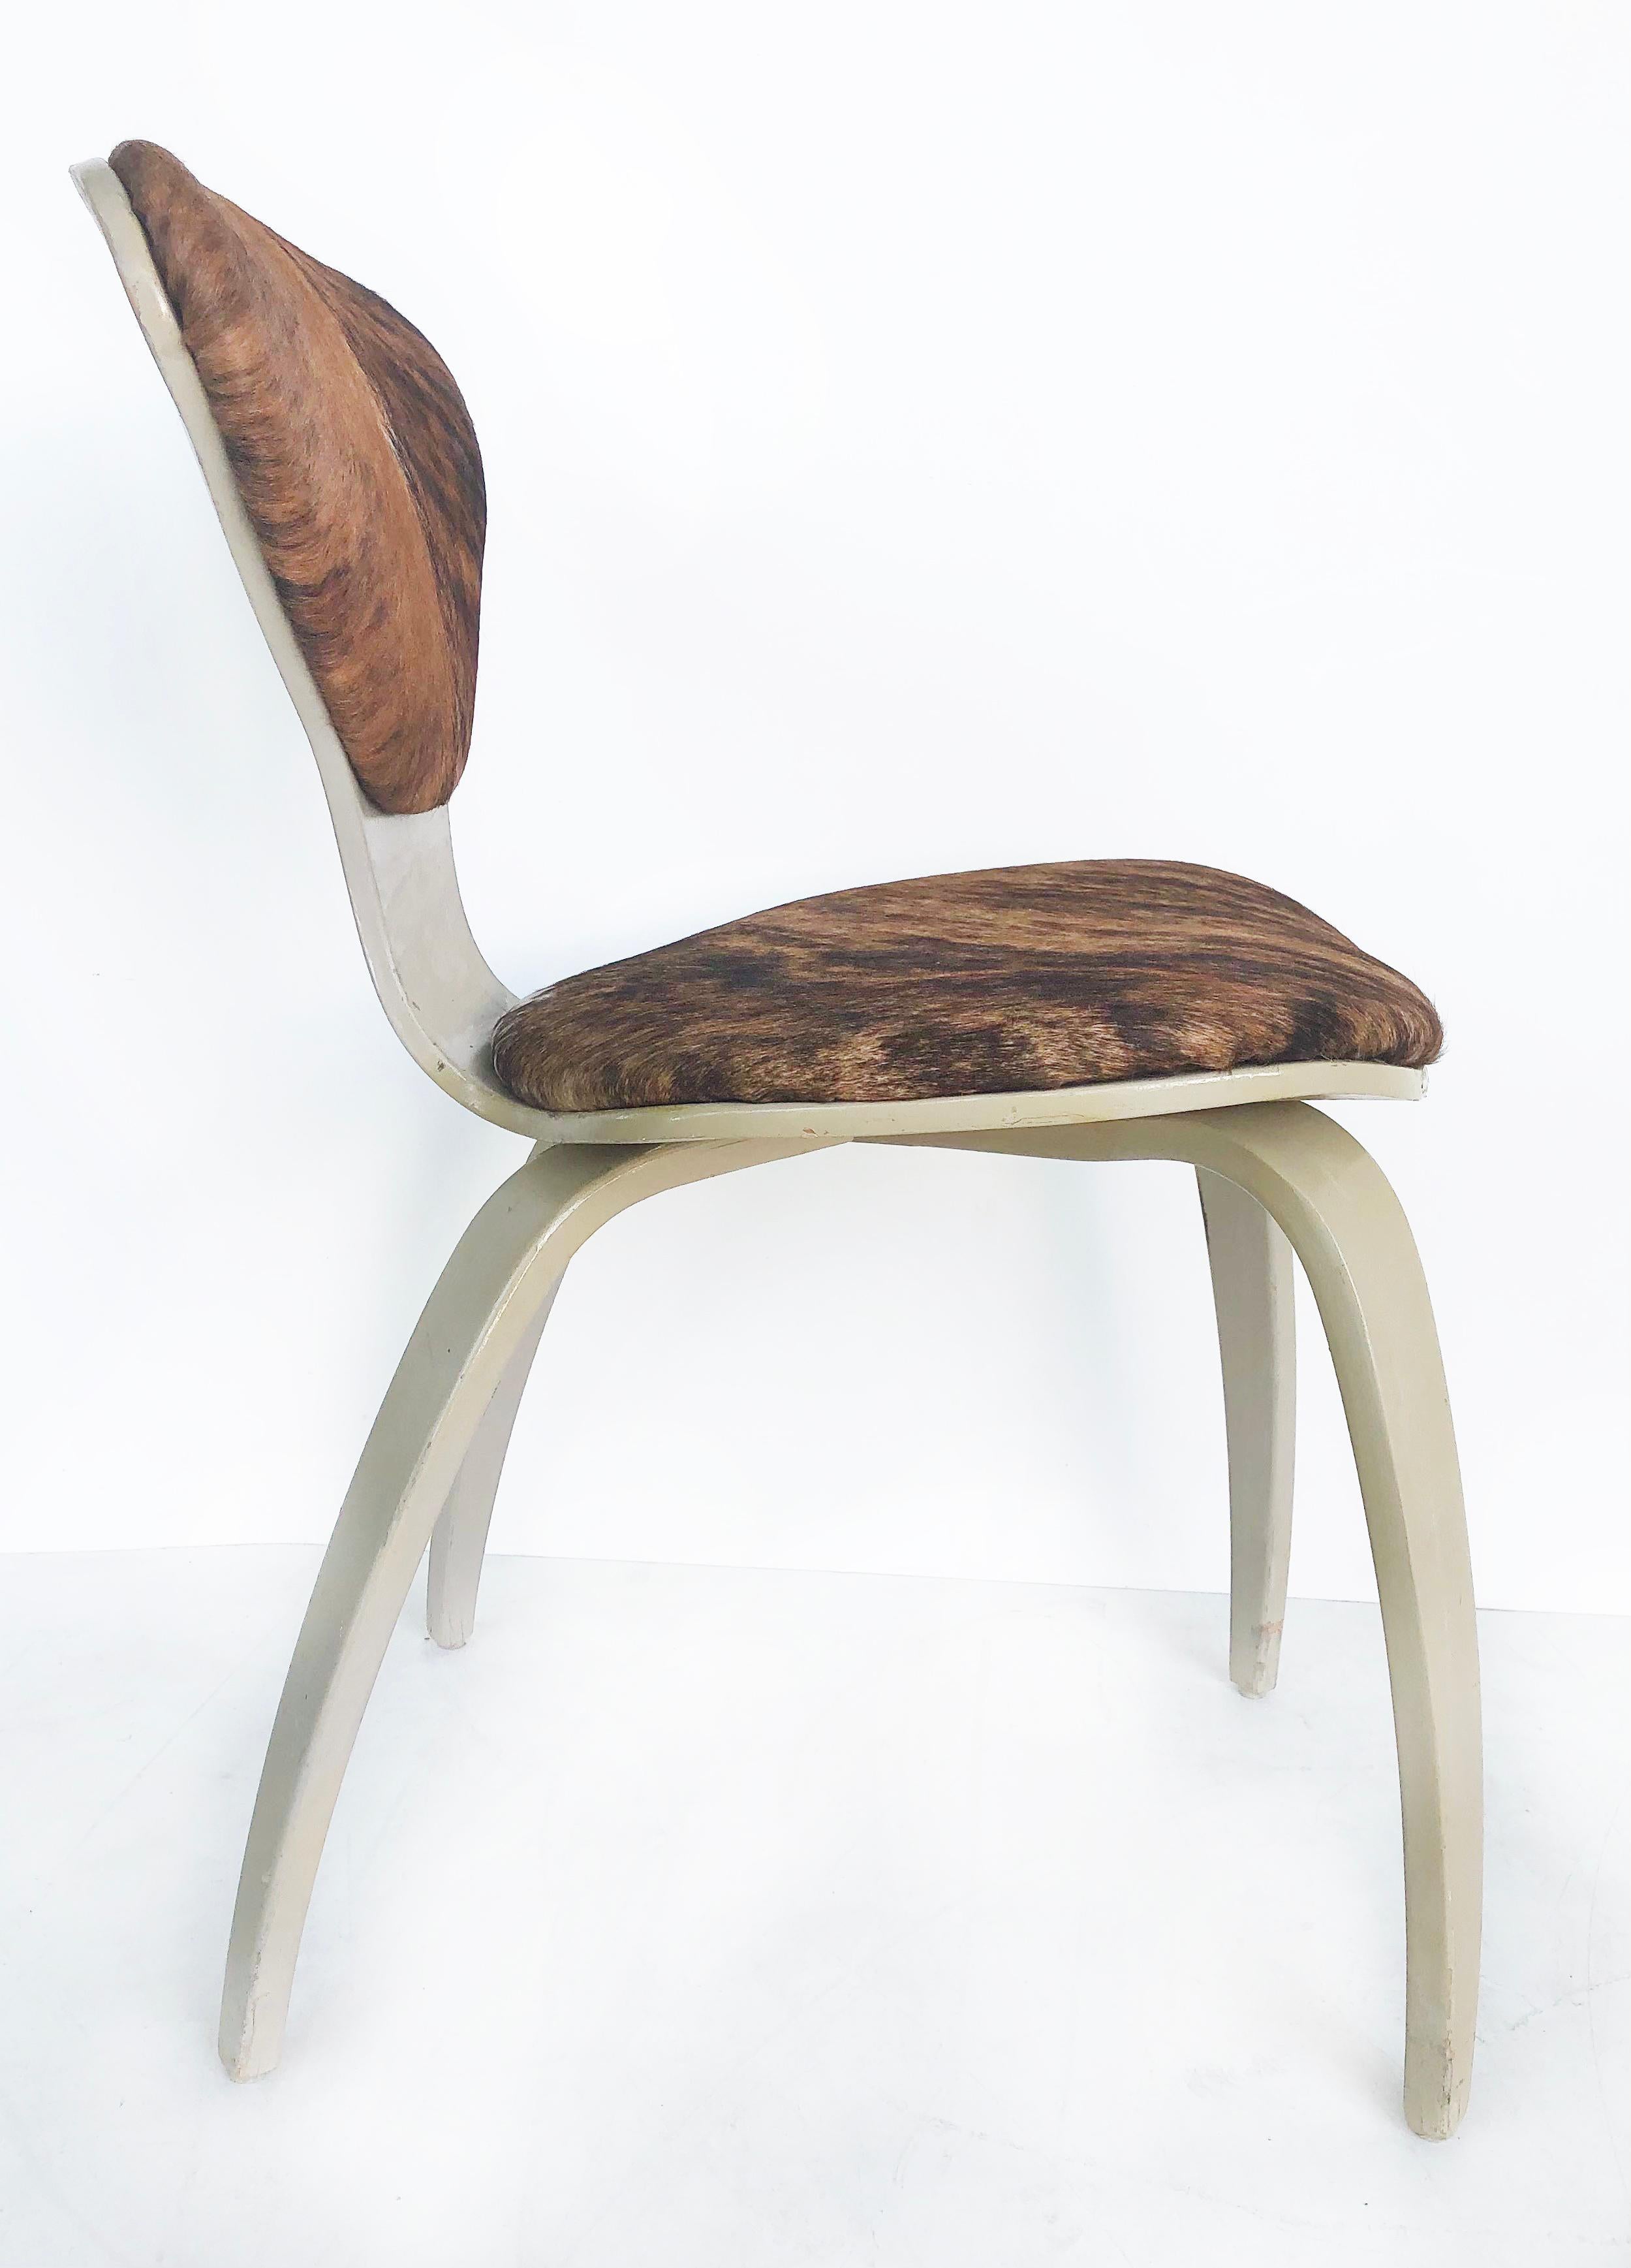 Laminated Norman Cherner Plycraft Chair Upholstered in Cowhide and Painted